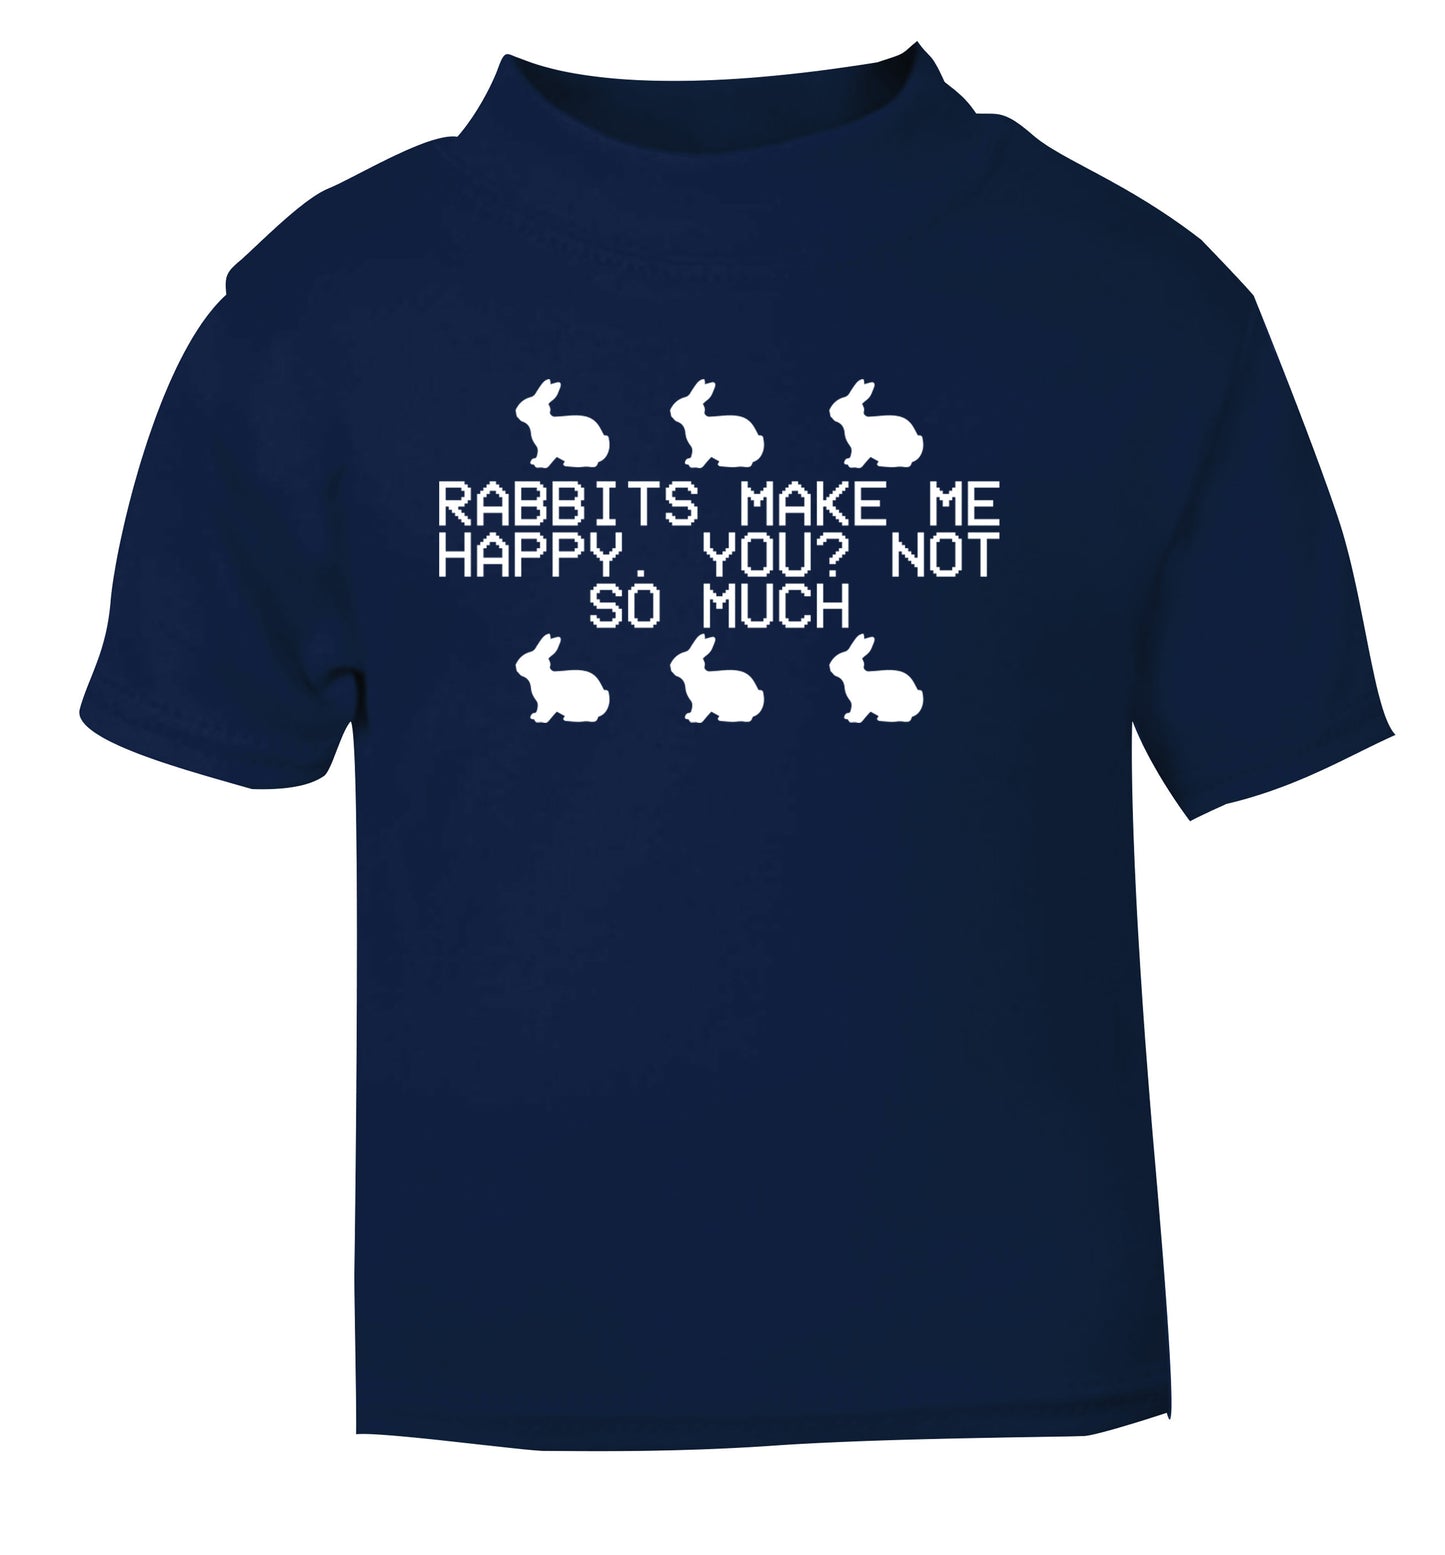 Rabbits make me happy, you not so much navy Baby Toddler Tshirt 2 Years